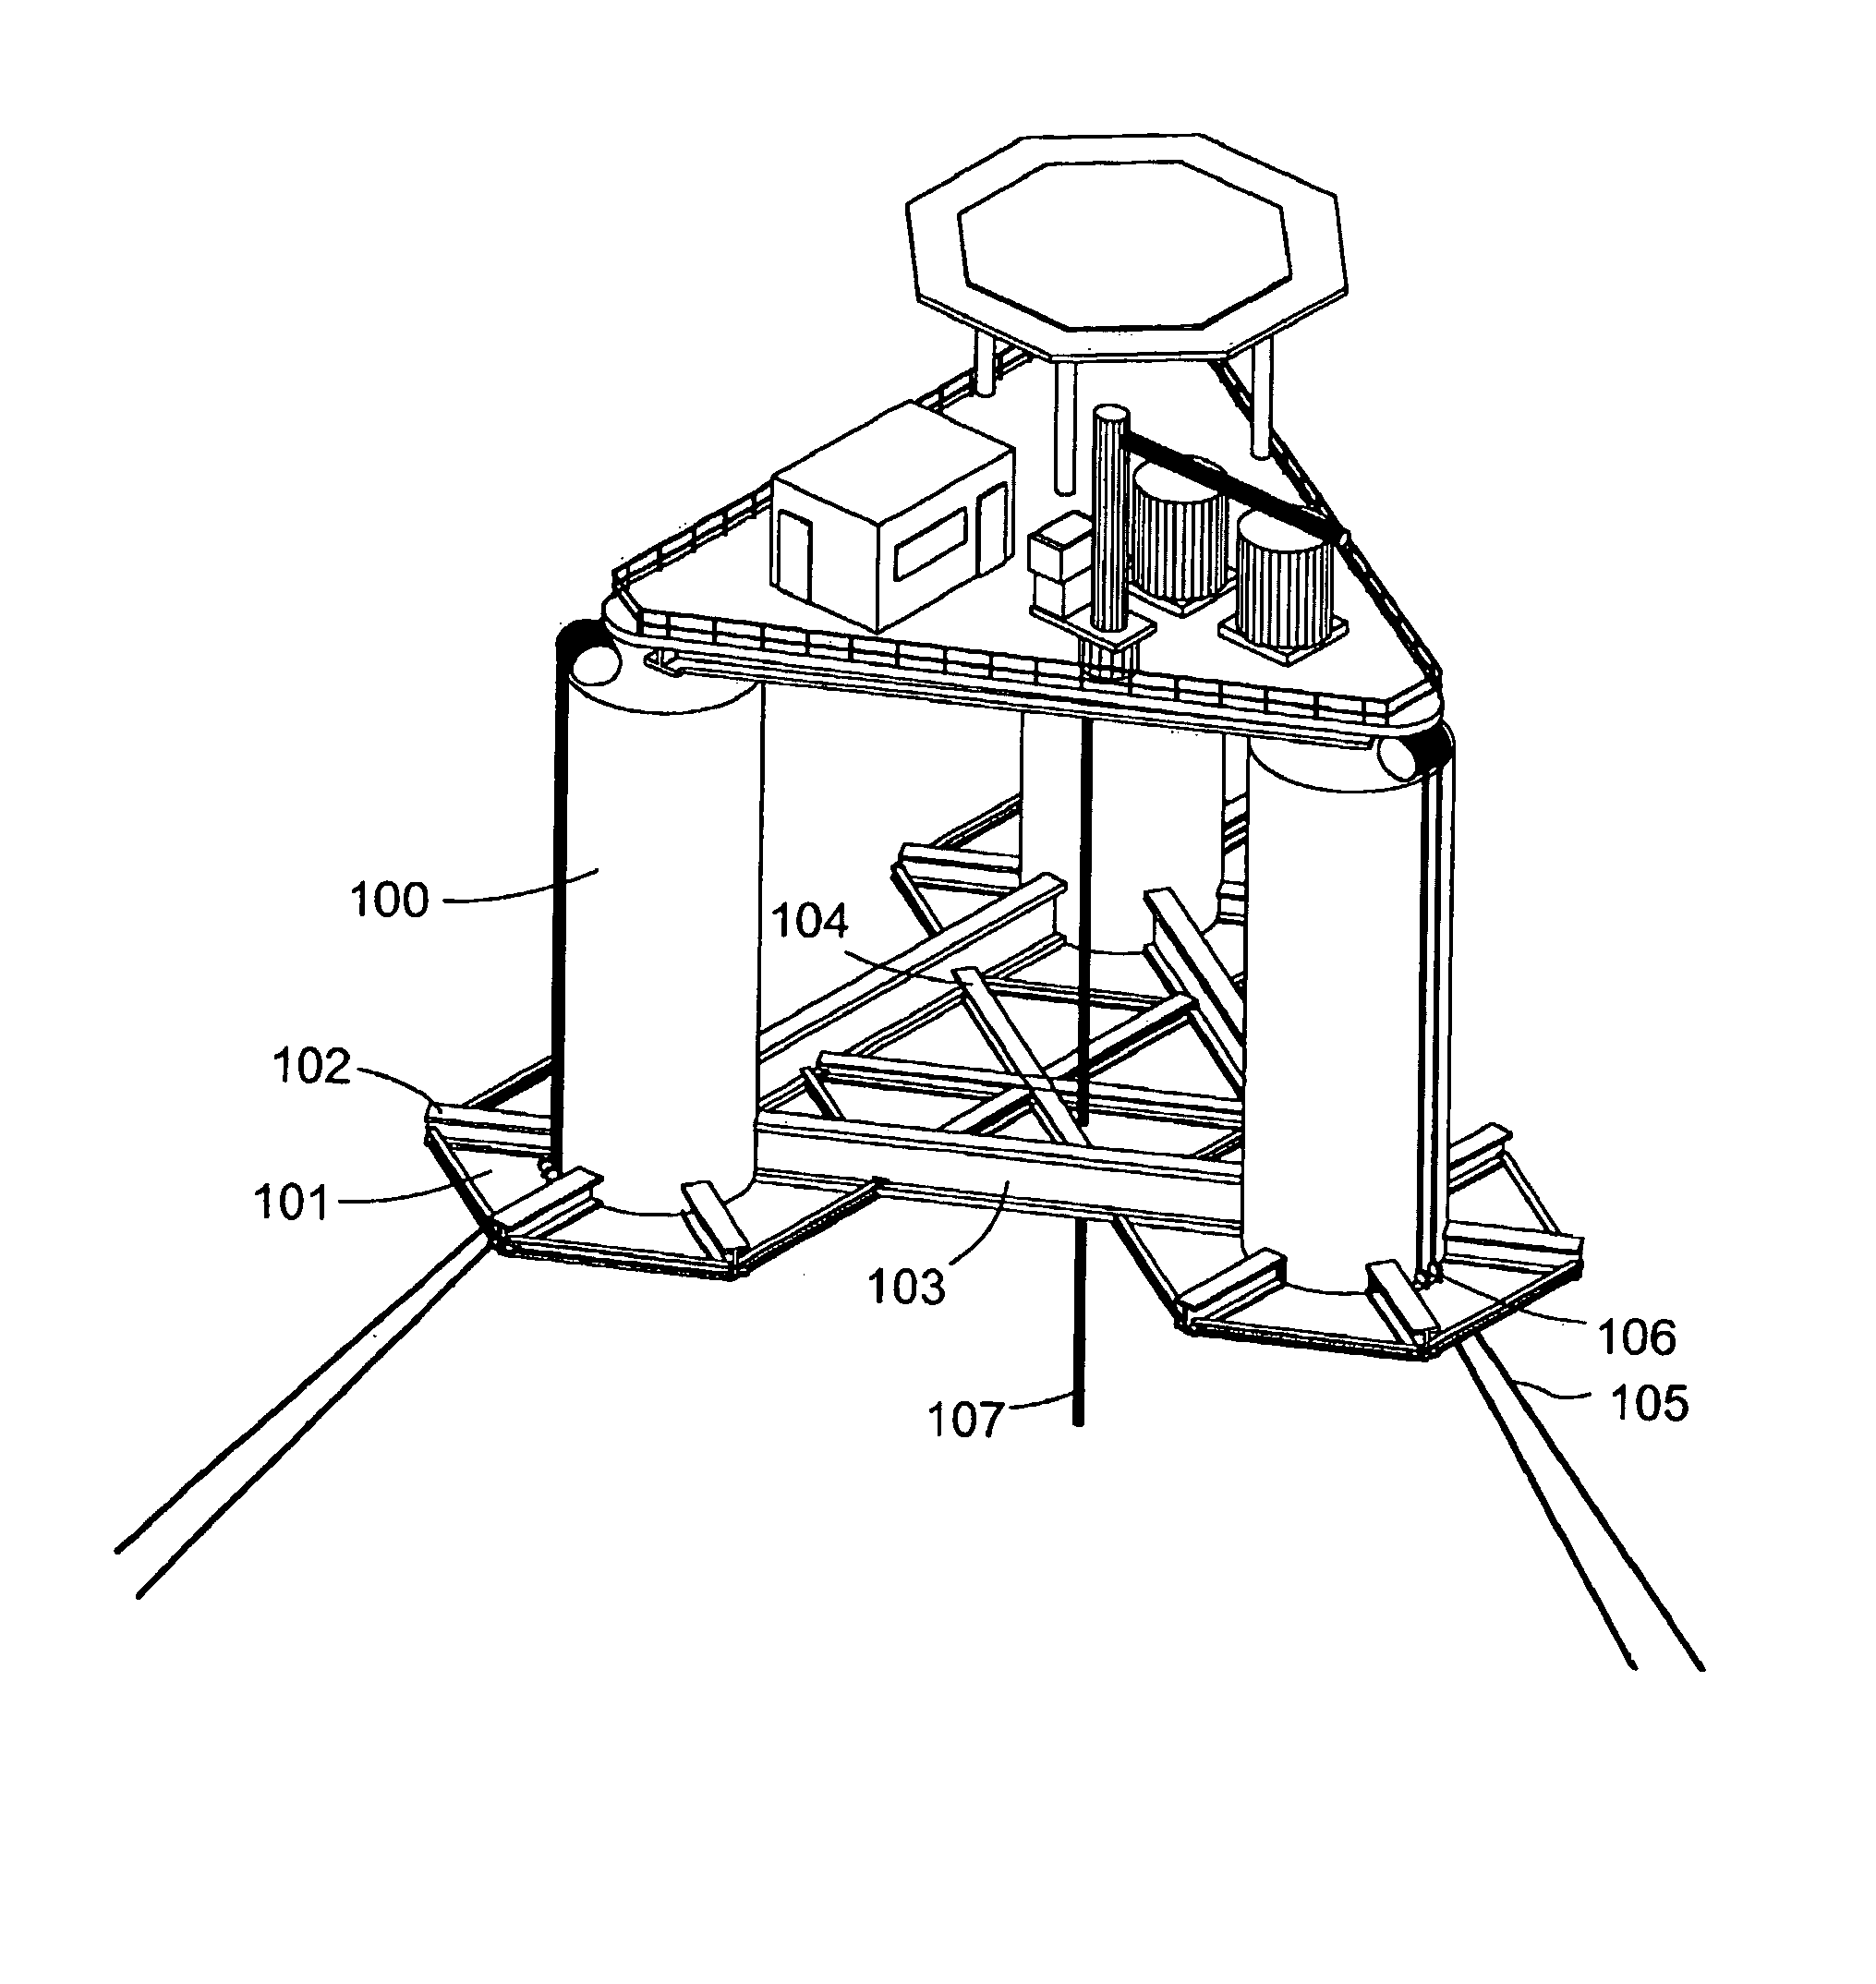 Column-stabilized platform with water-entrapment plate